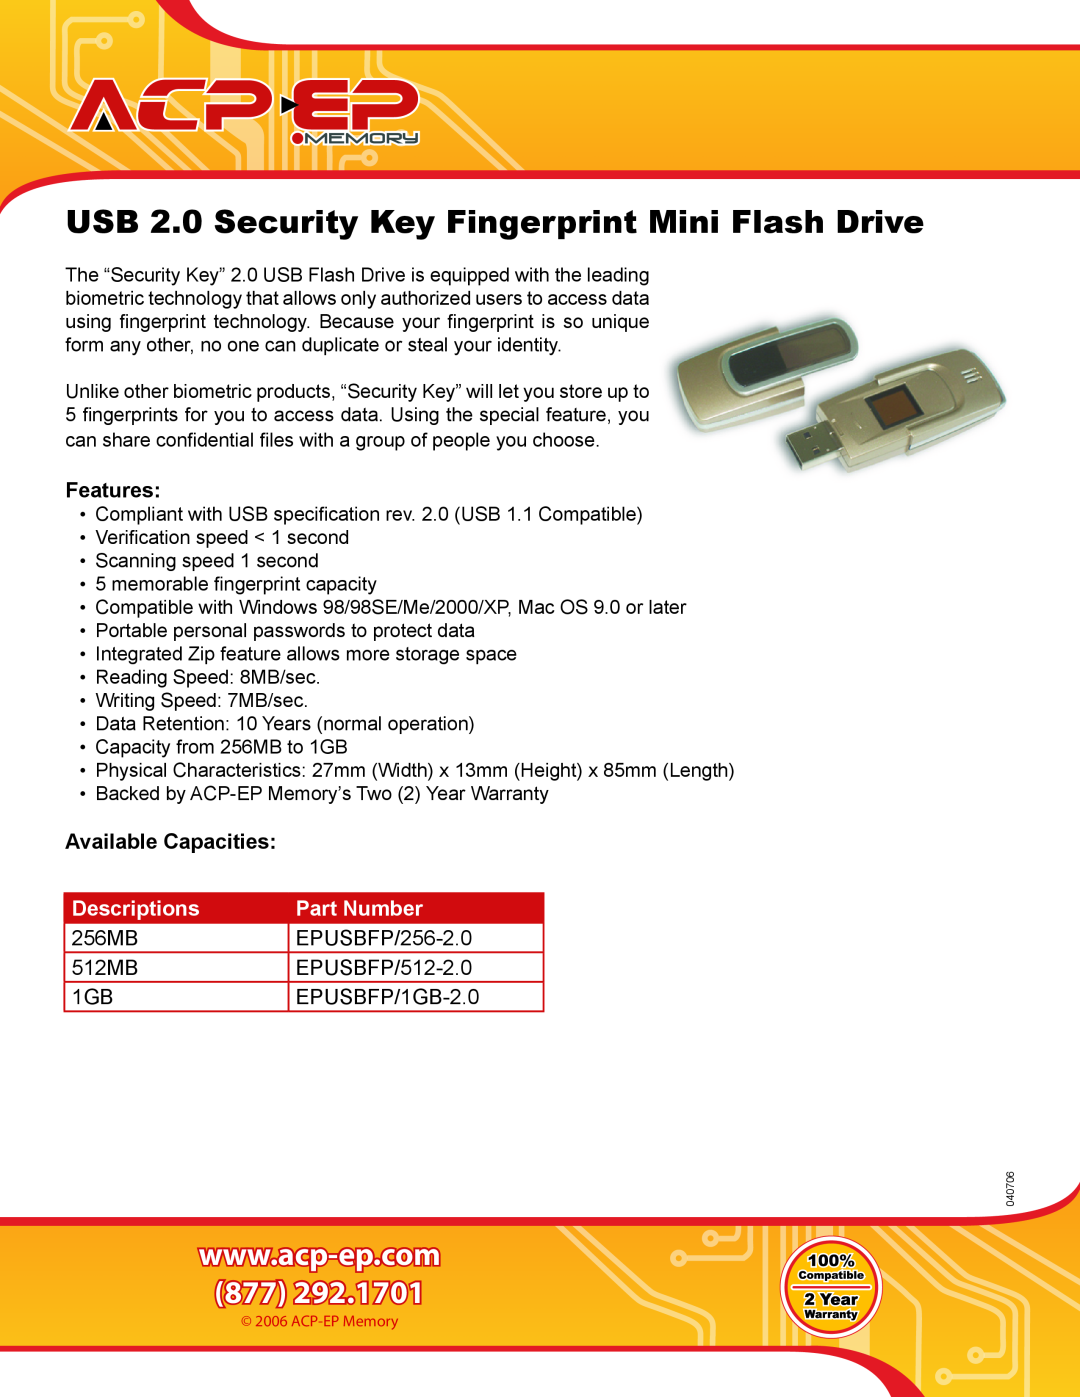 ACP-EP Memory EPUSBFP/1GB-2.0 warranty USB 2.0 Security Key Fingerprint Mini Flash Drive, Features, Available Capacities 